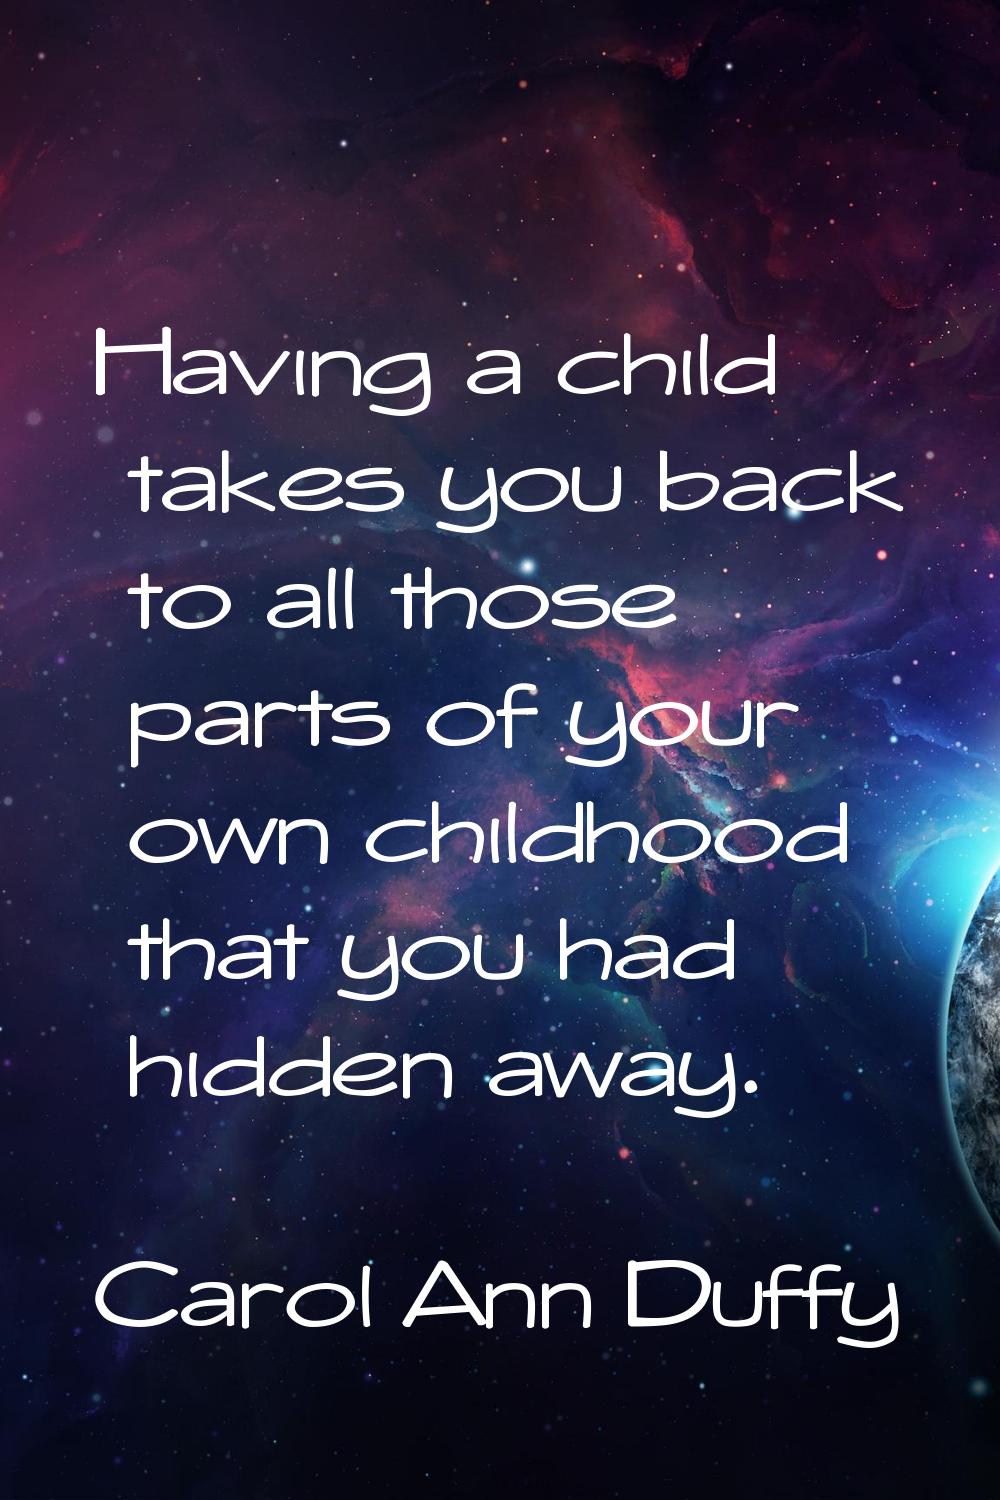 Having a child takes you back to all those parts of your own childhood that you had hidden away.